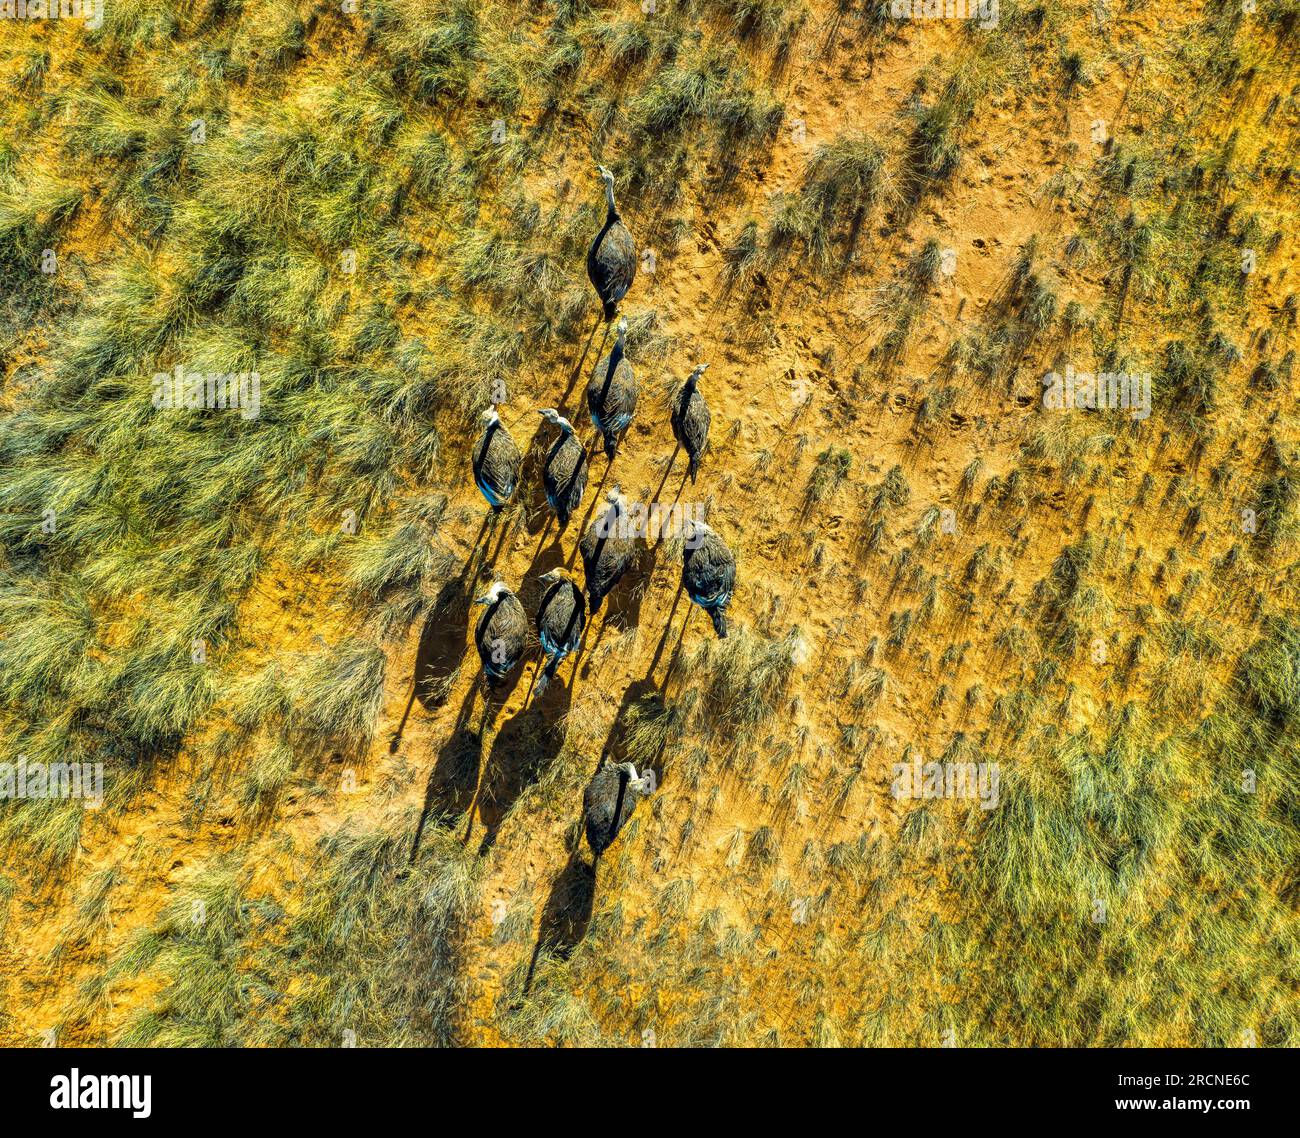 aerial view of a heard of ostriches grazing in the dry savannah, sandy area with patches of long grass Stock Photo